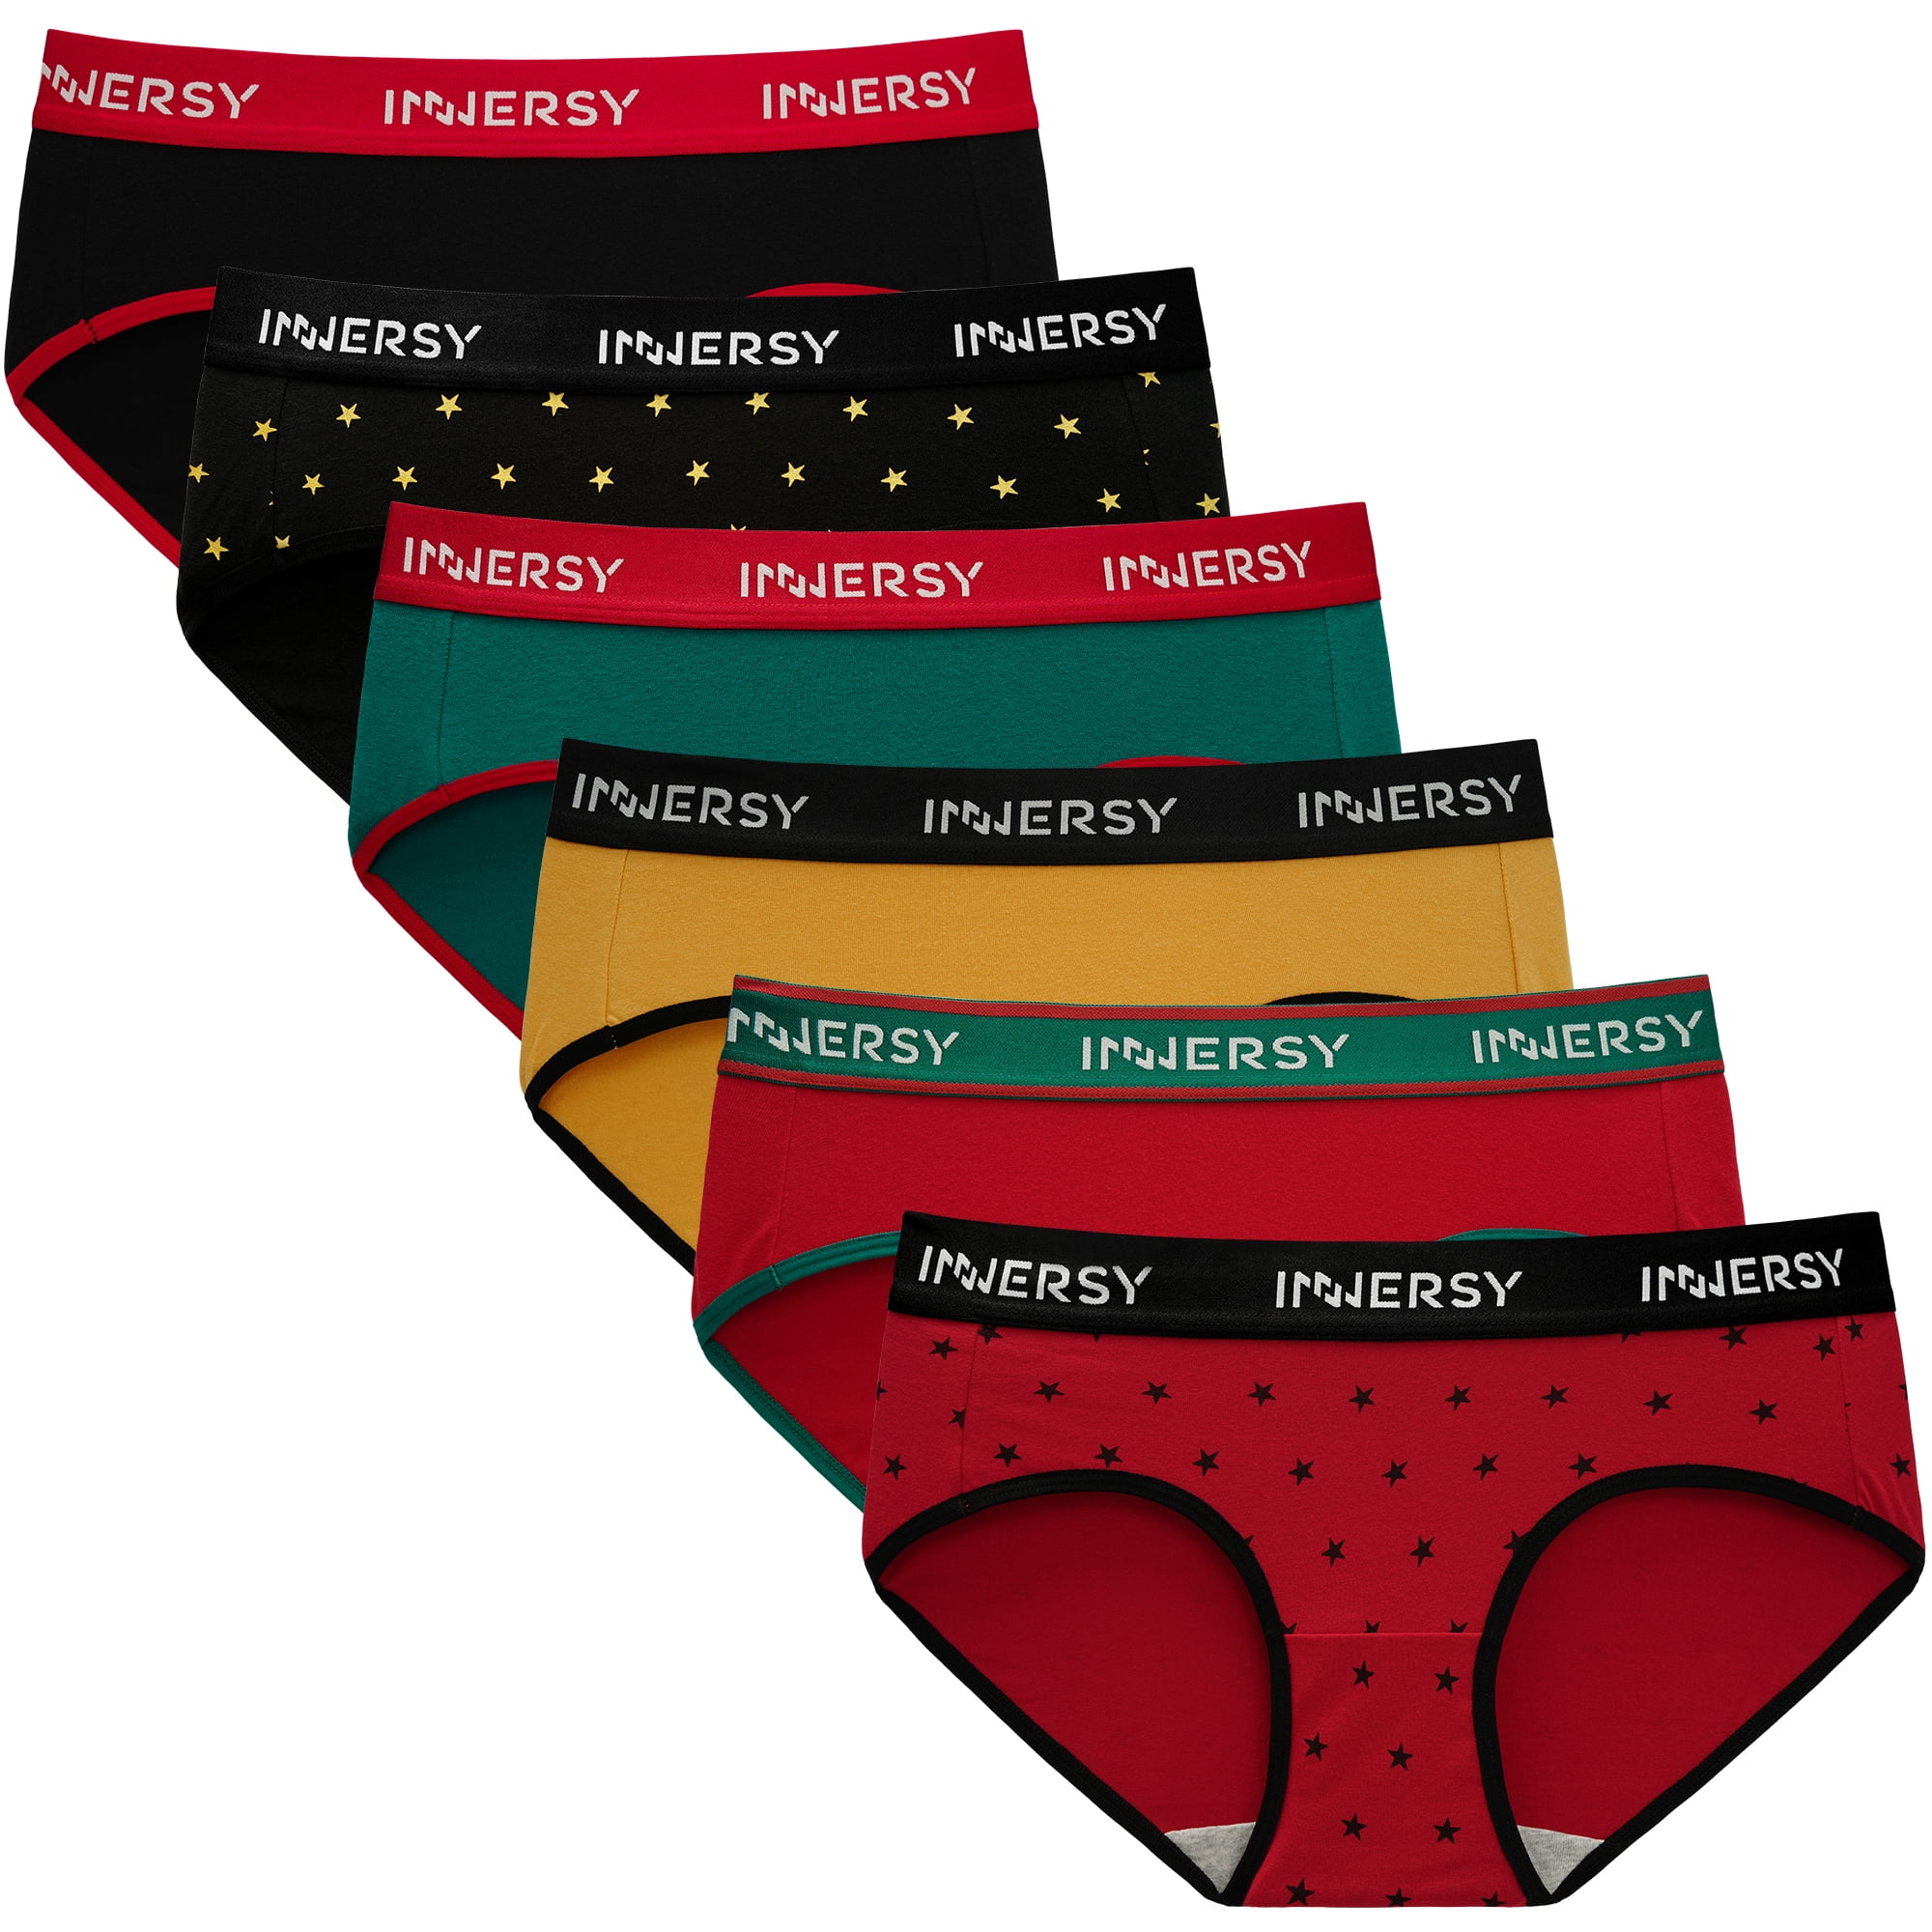 INNERSY Womens' Hipster Underwear Cotton Panties Wide Waistband Sport  Underwear Pack of 6 (X-Large, Black With Colorful Waistbands) 